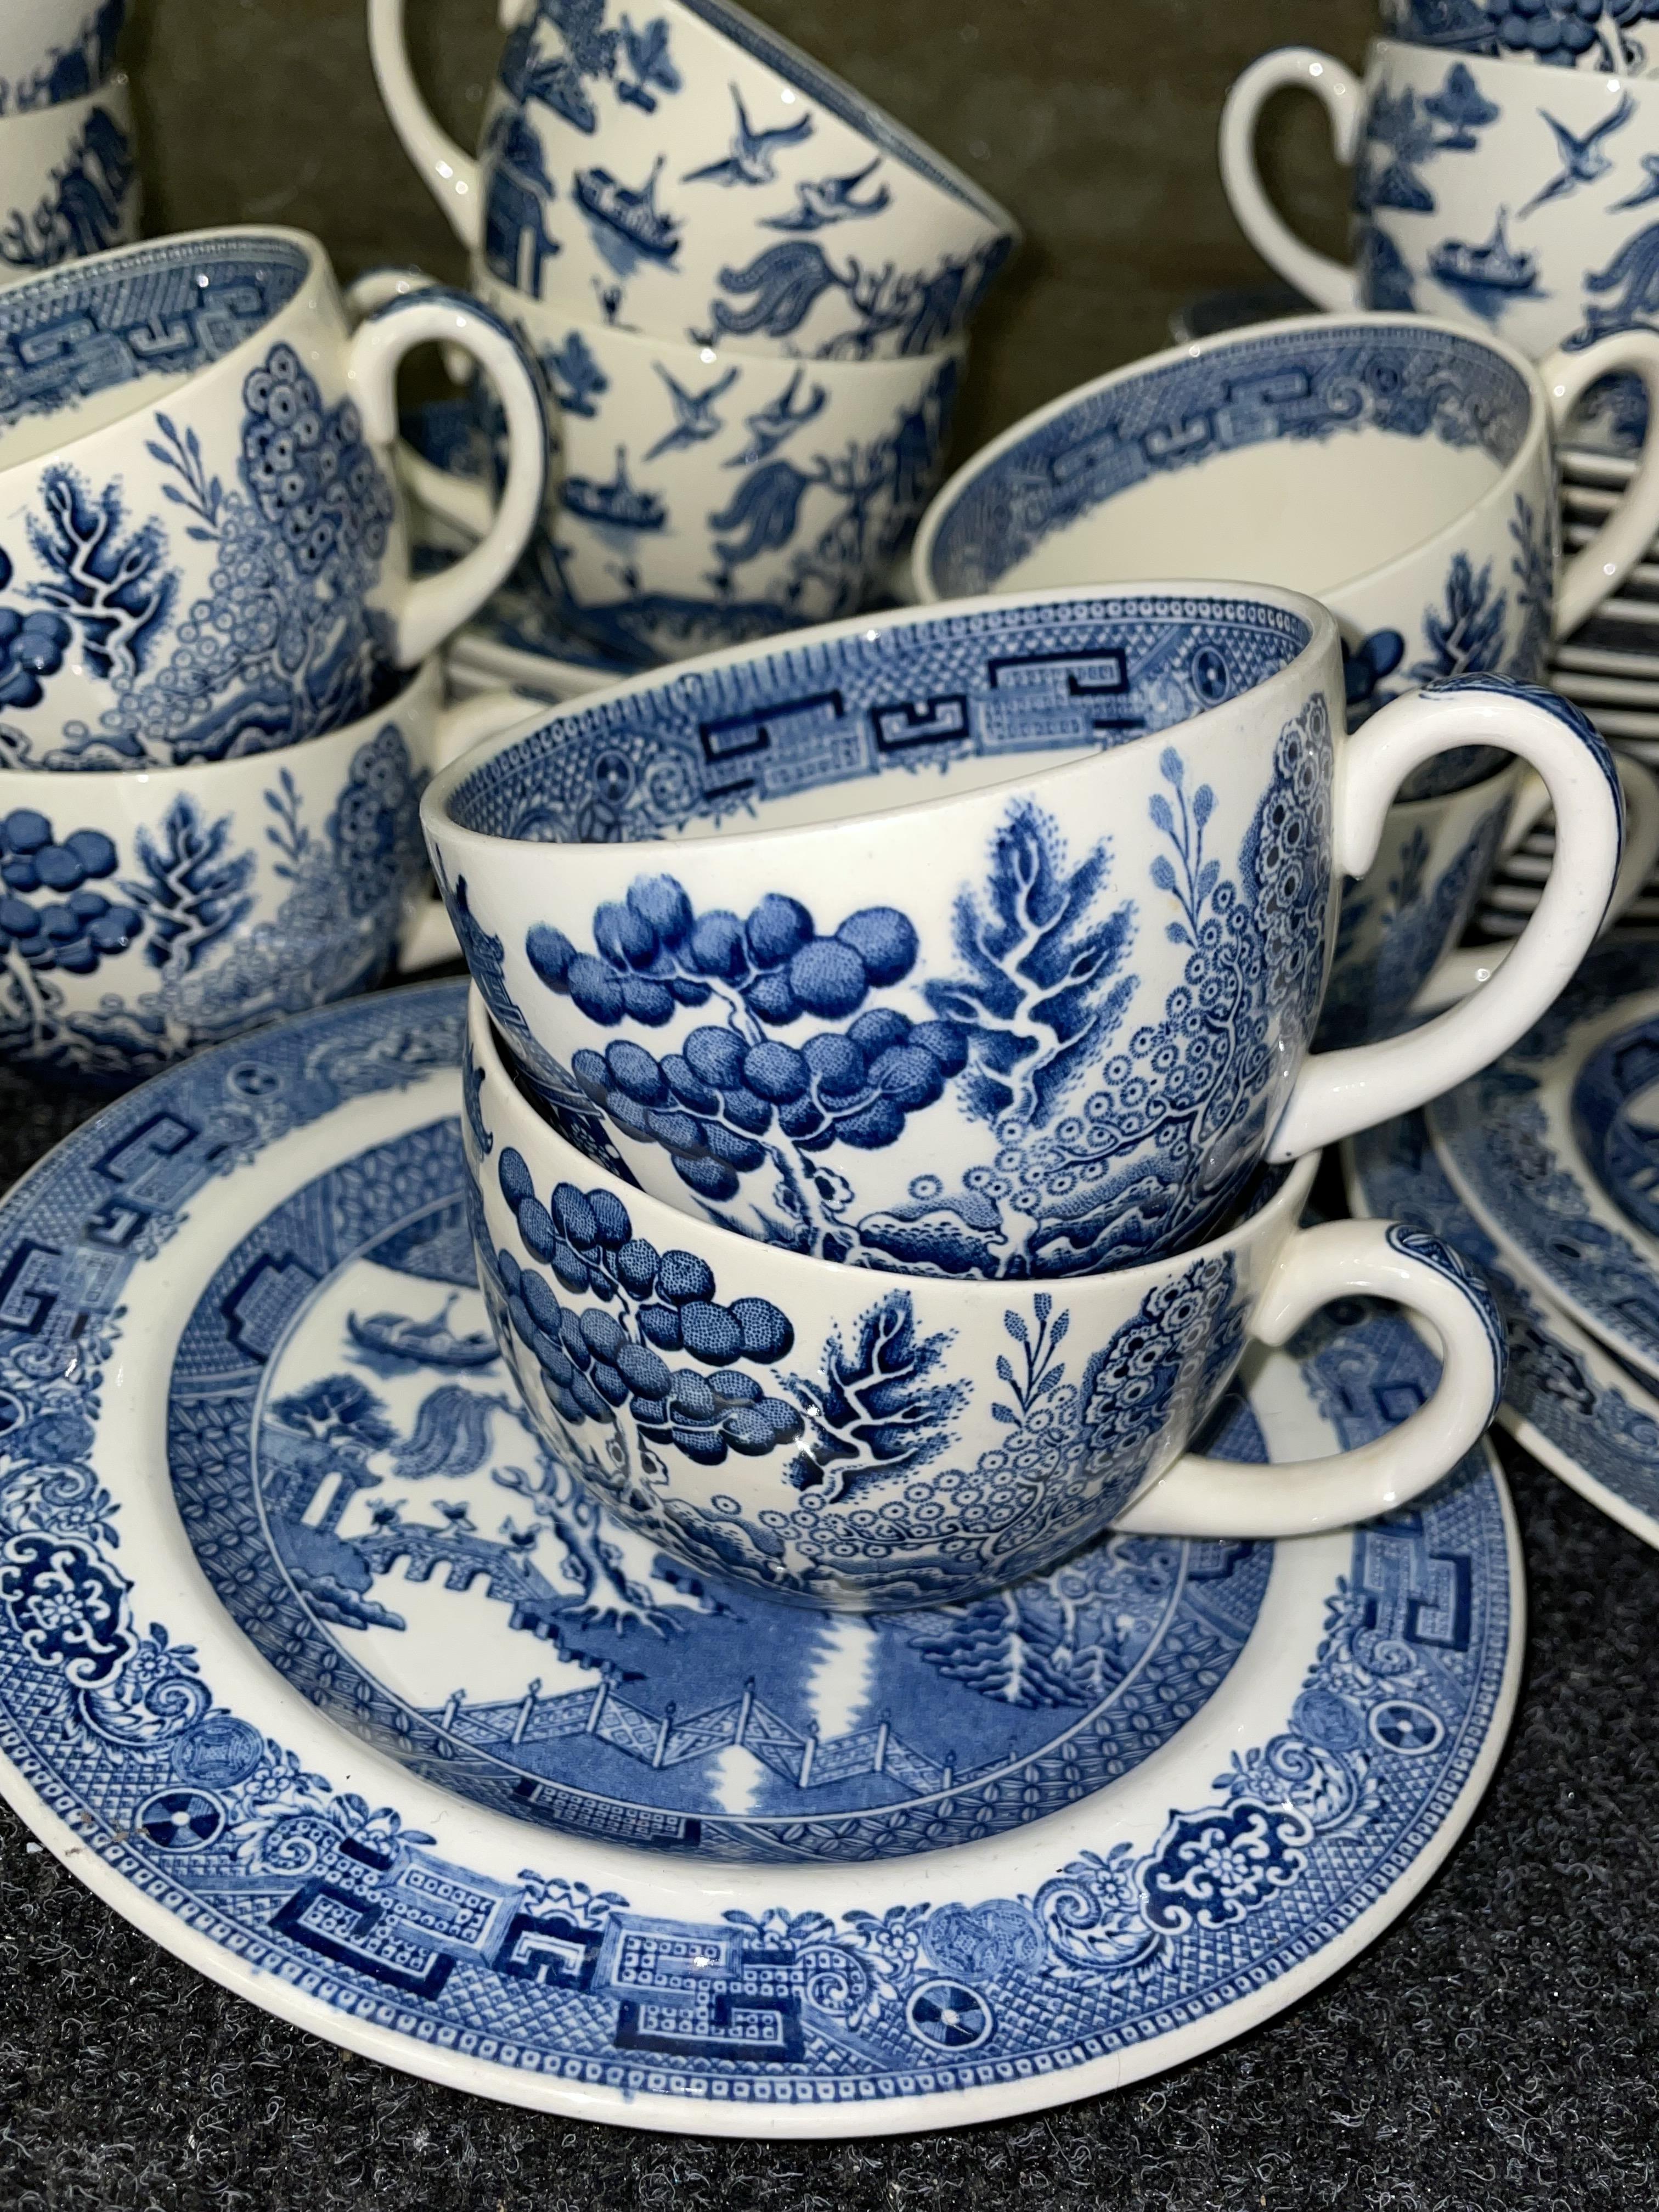 SHELF OF WEDGWOOD BLUE AND WHITE WILLOW PATTERN TEA WARES - Image 3 of 5